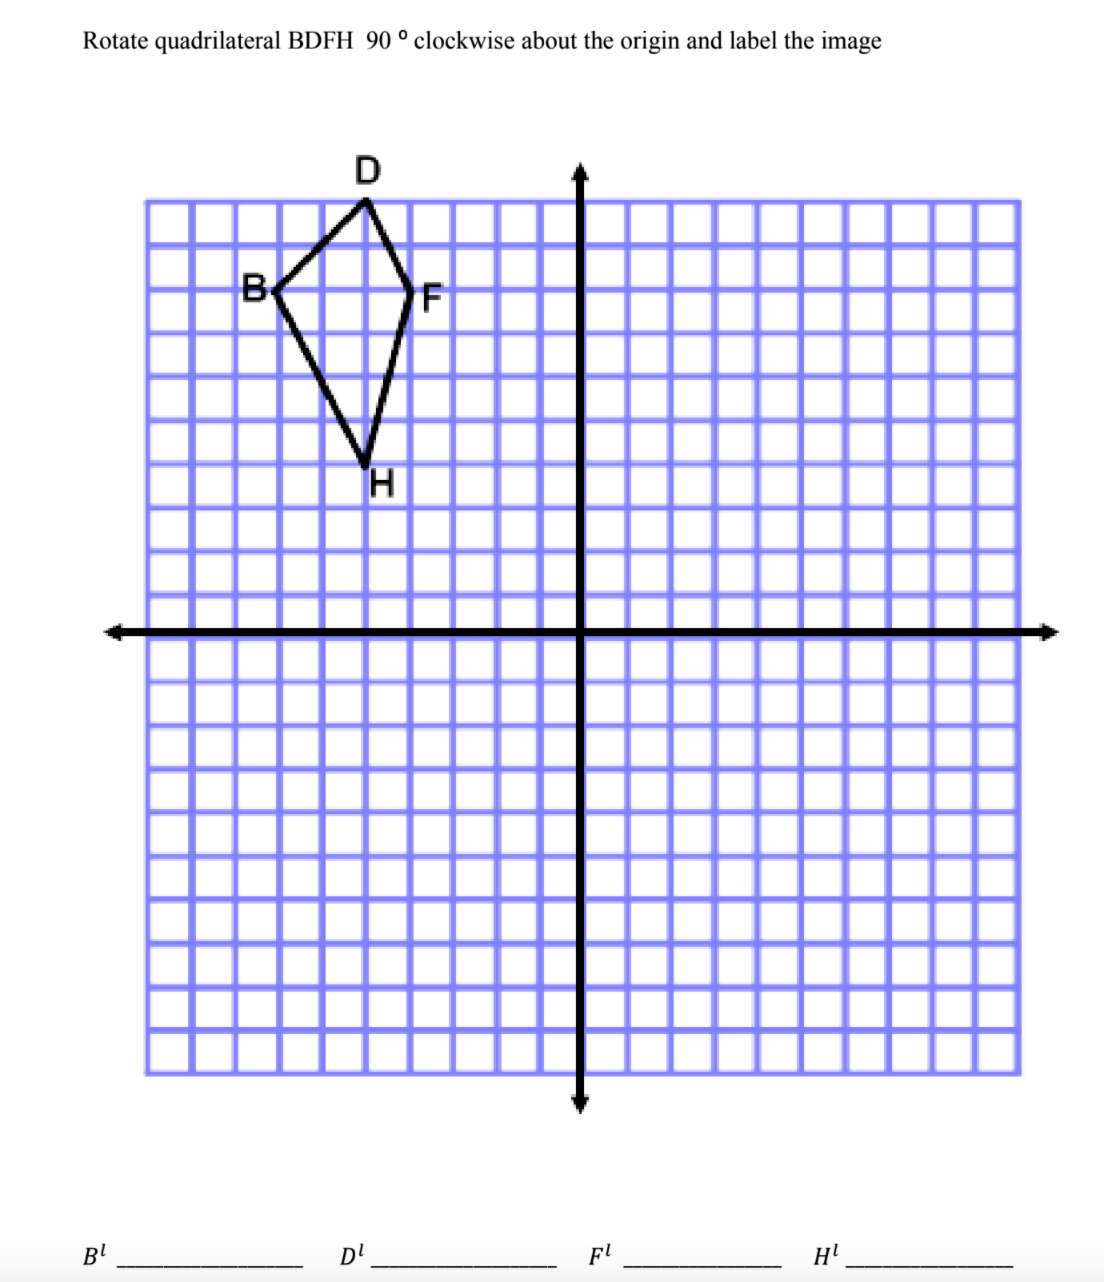 Rotate quadrilateral BDFH 90 ° clockwise about the origin and label the image
D
B
B!
D'
Fl
H!
